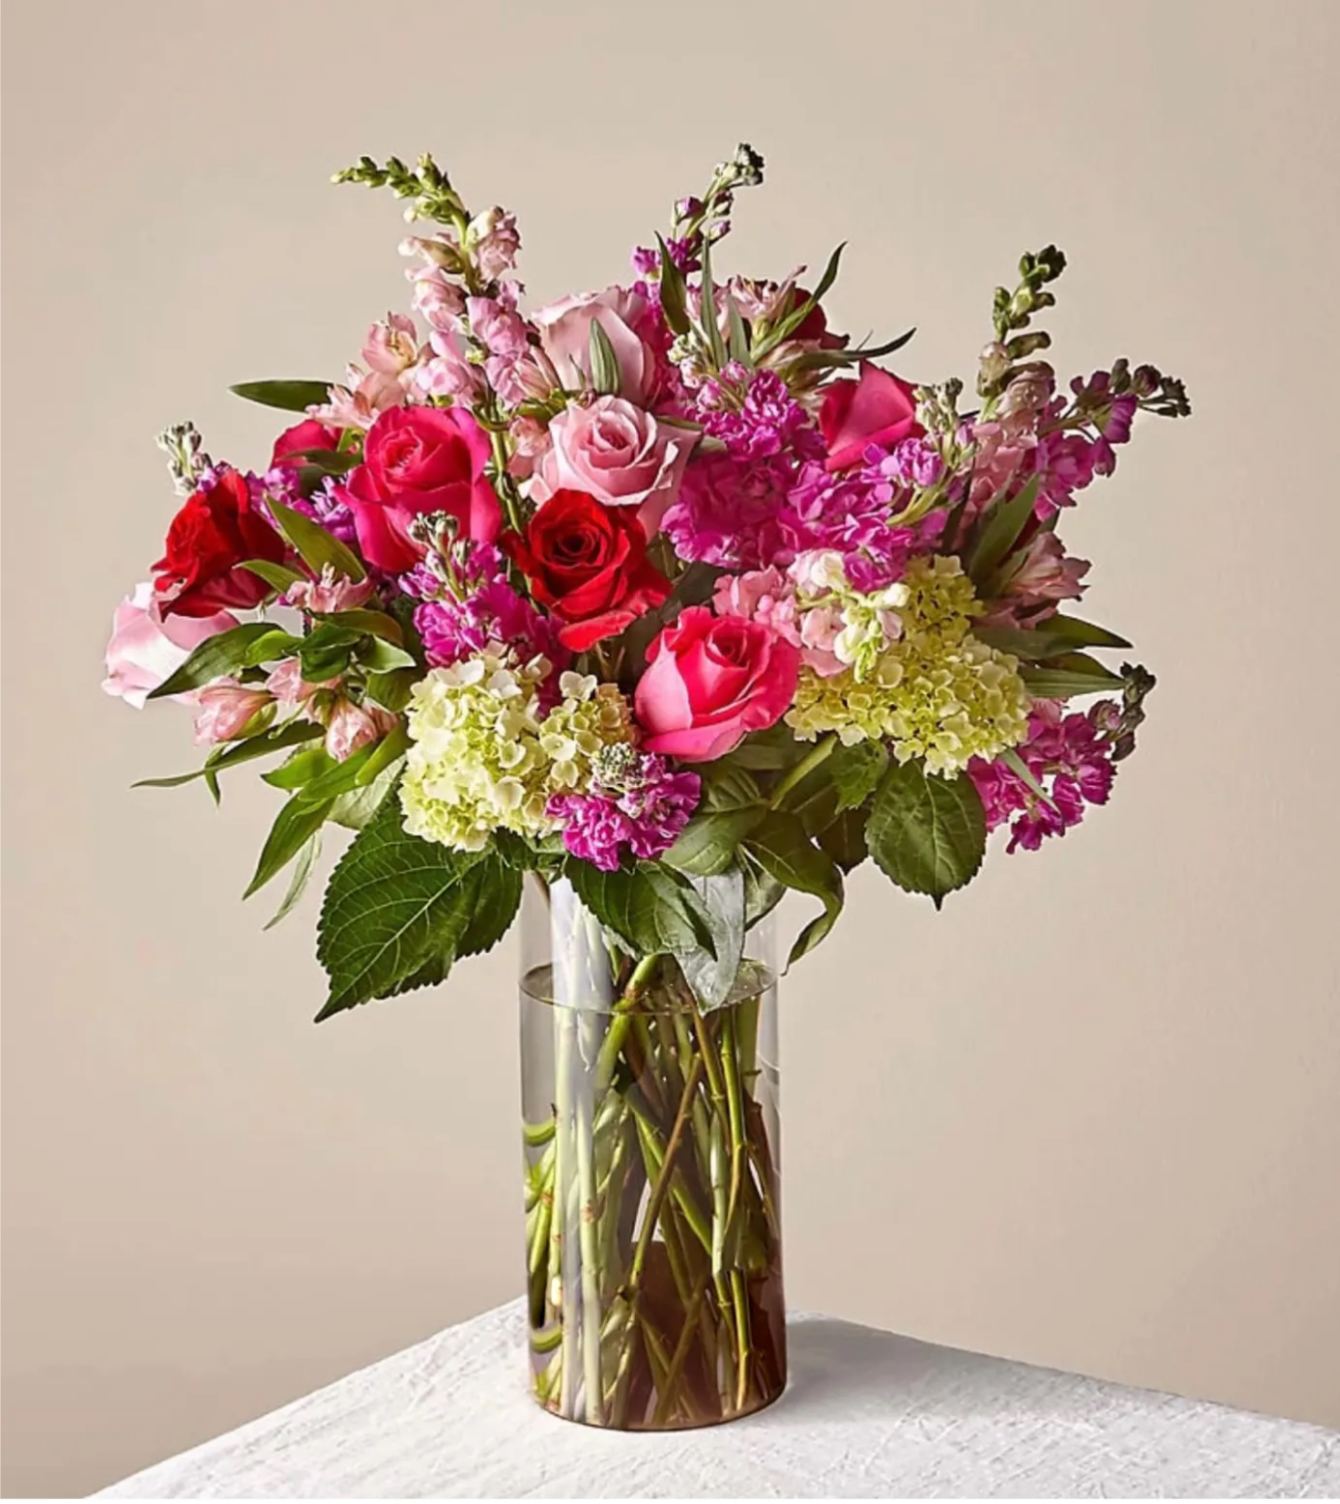 You &amp; Me Luxury Bouquet - It's the season of love, and this bouquet is the bold, romantic gesture you're looking for. Three colors of roses (red, pink &amp; hot pink) mixed with hydrangea, snapdragons &amp; more flowers in a glass vase is the perfect way to remind your love that you were meant to be together.